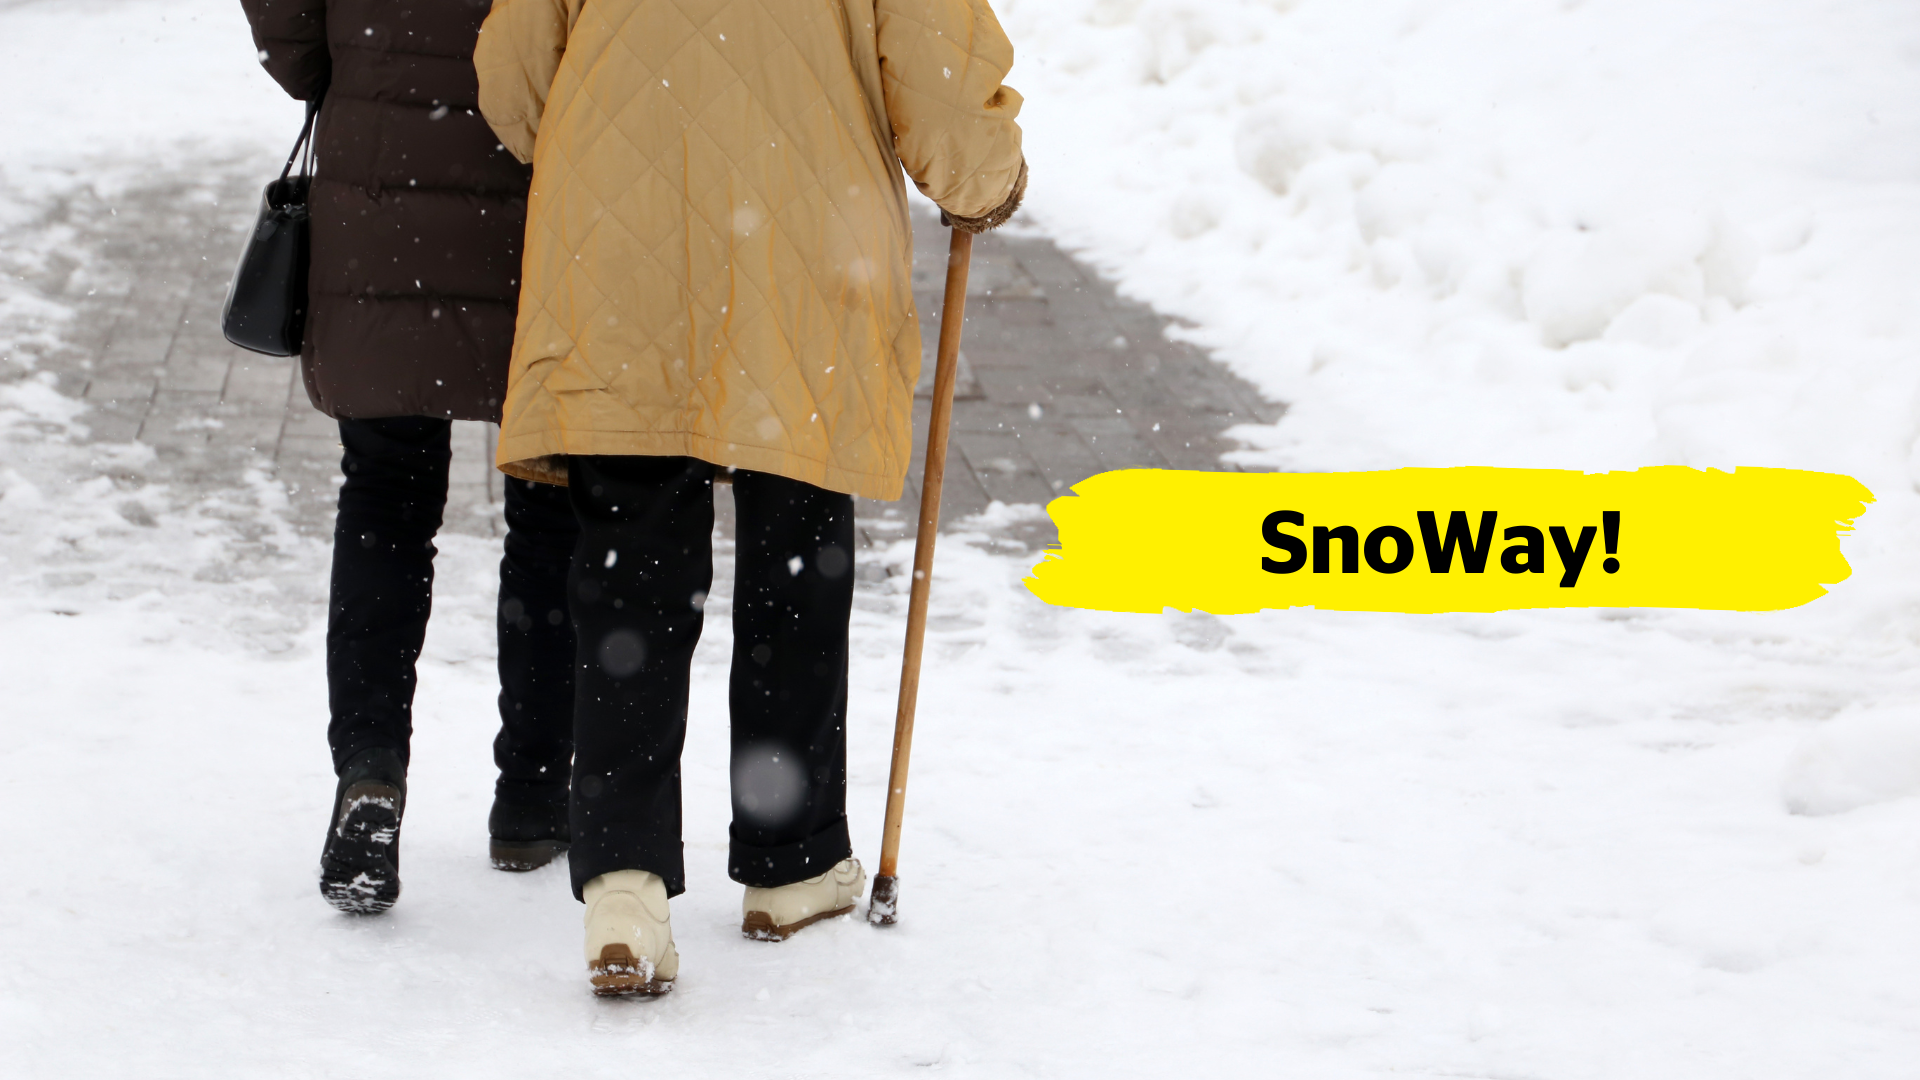 Two people from behind walk down a snowy pathway. One elderly person uses a walking cane and holds onto the elbow of their companion.  In the centre of the image, there is a yellow banner overlay with the text “SnoWay!”